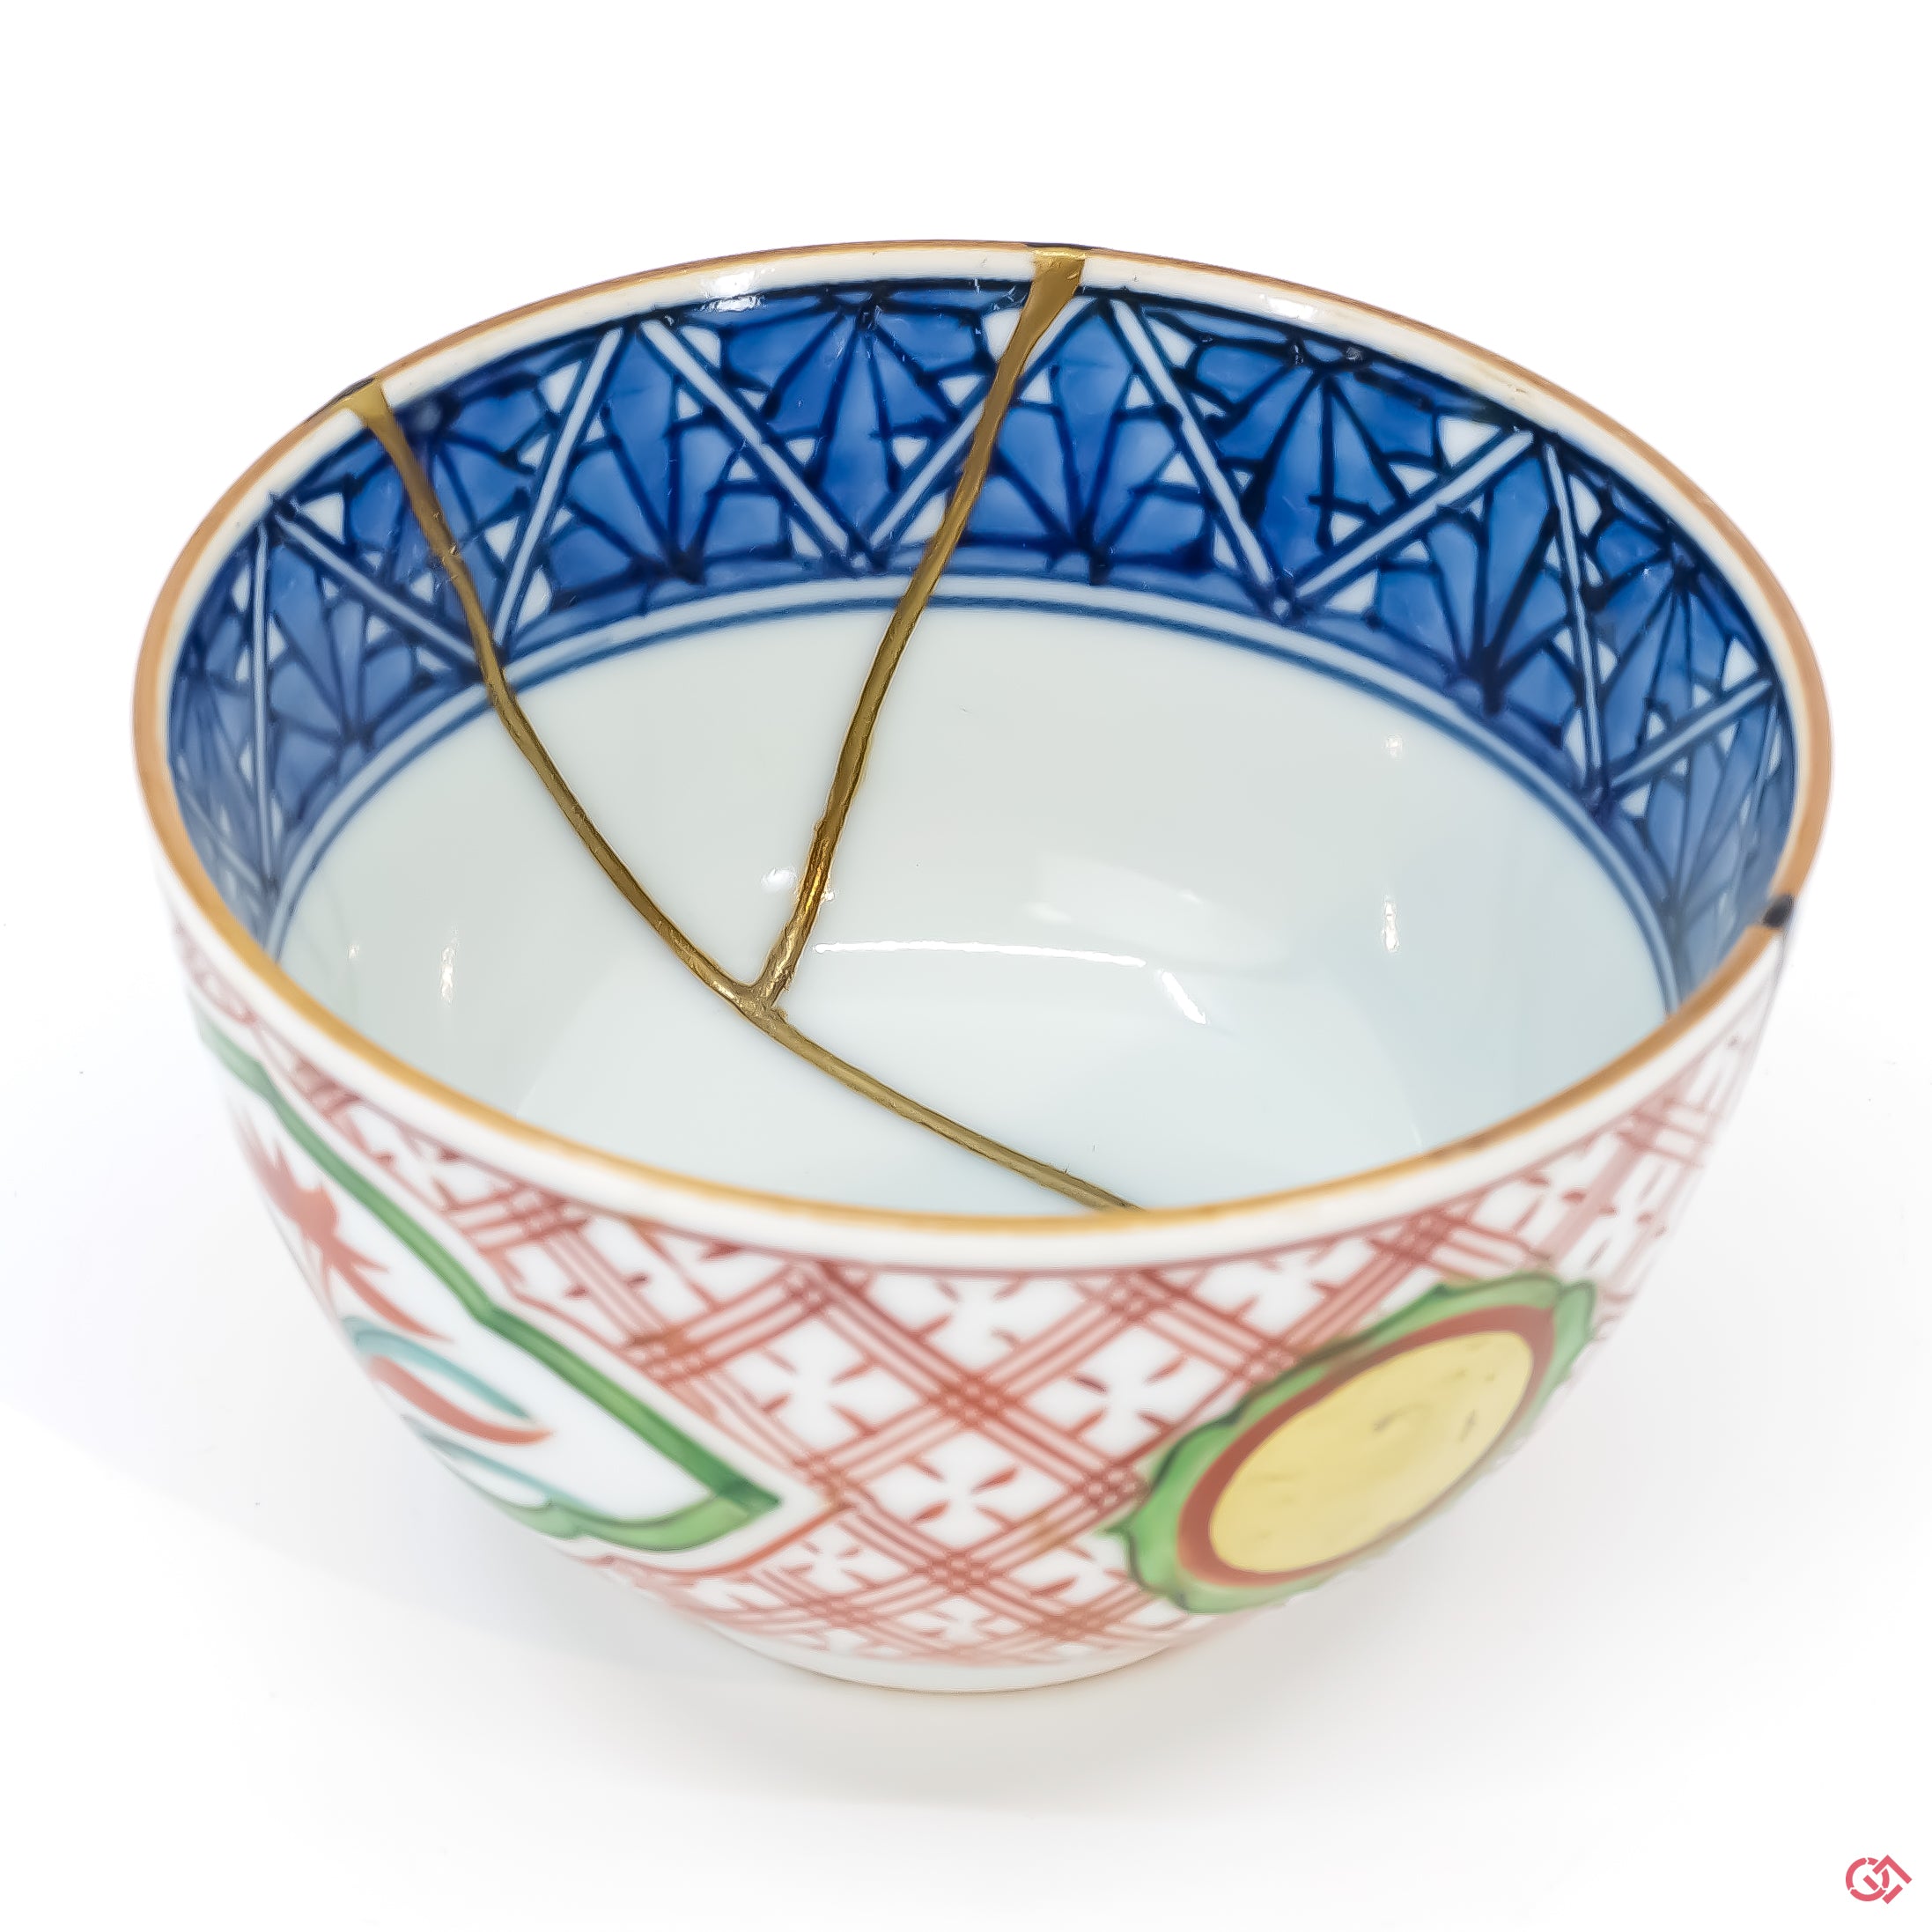 Buy the Japanese art of Kintsugi up close: Witness the delicate brushstrokes of gold that transform imperfection into beauty.